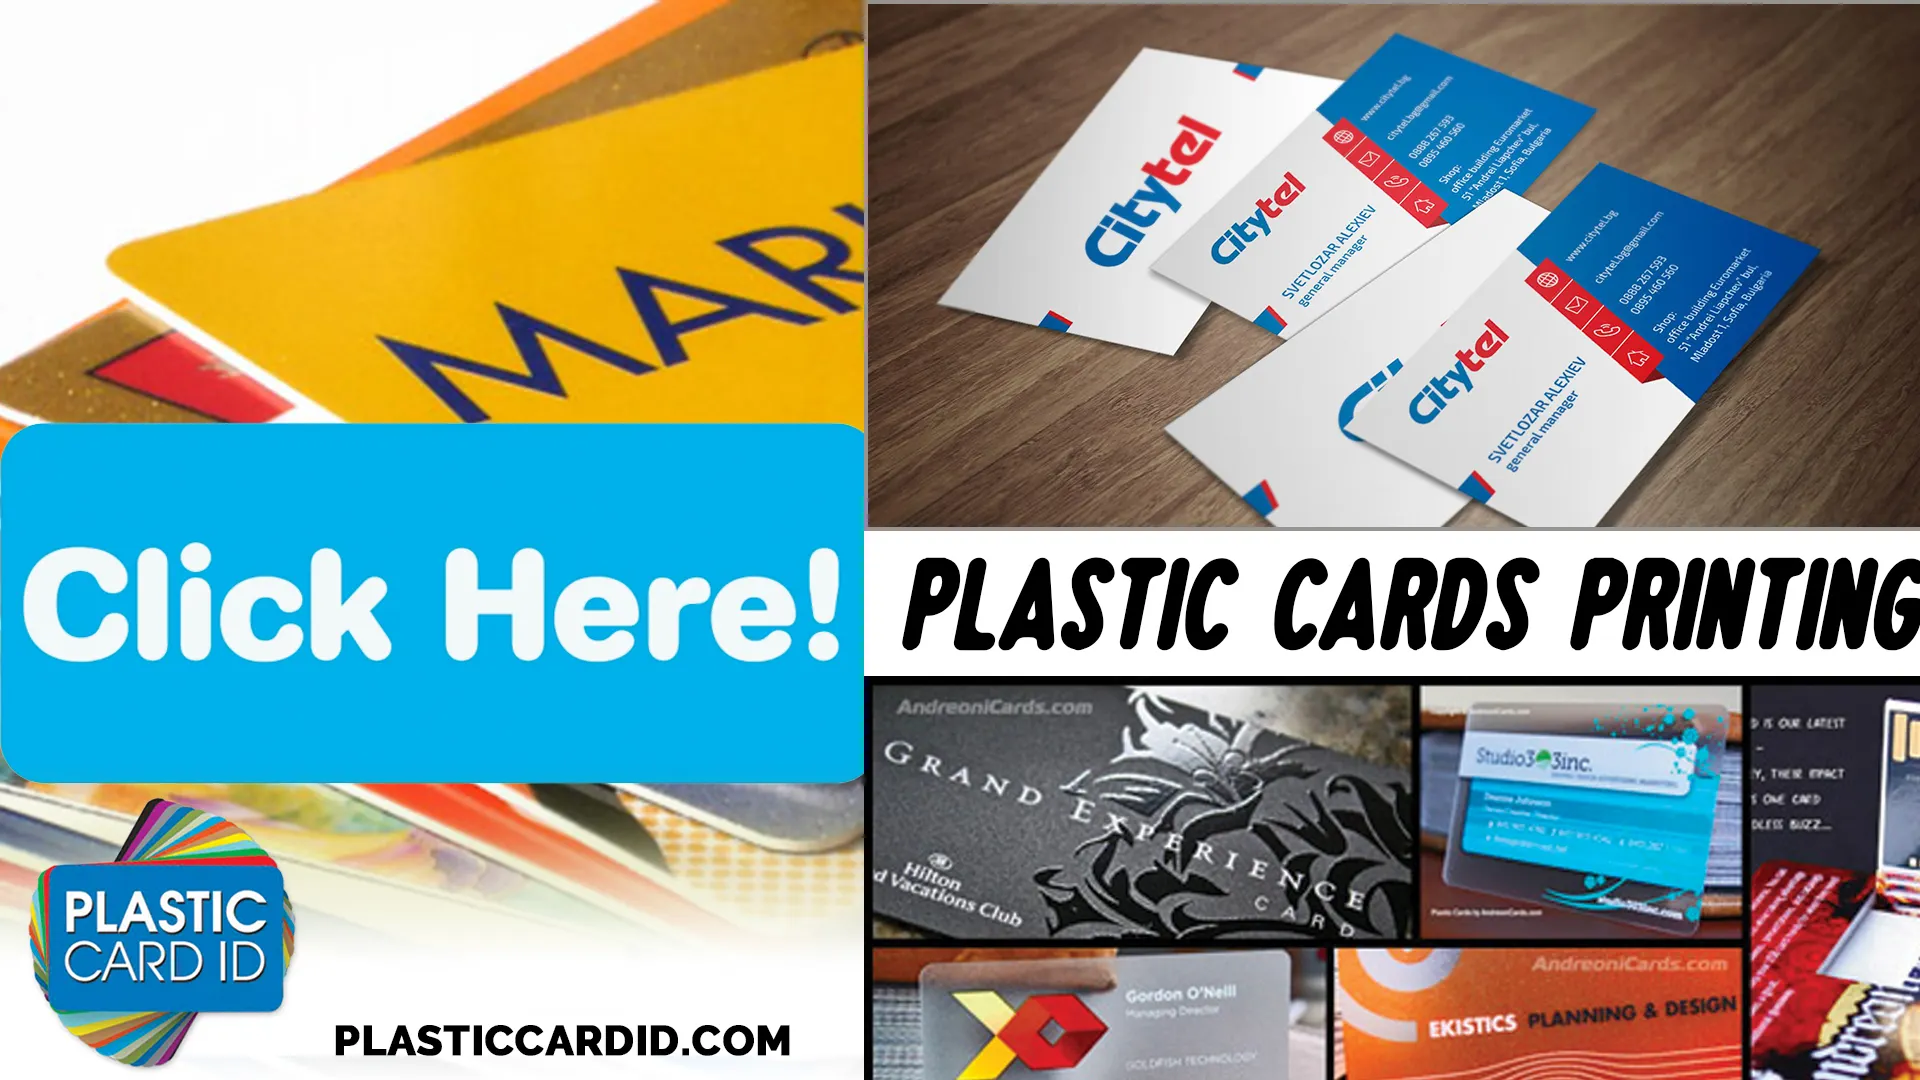 What Makes a Successful Branded Plastic Card Campaign?